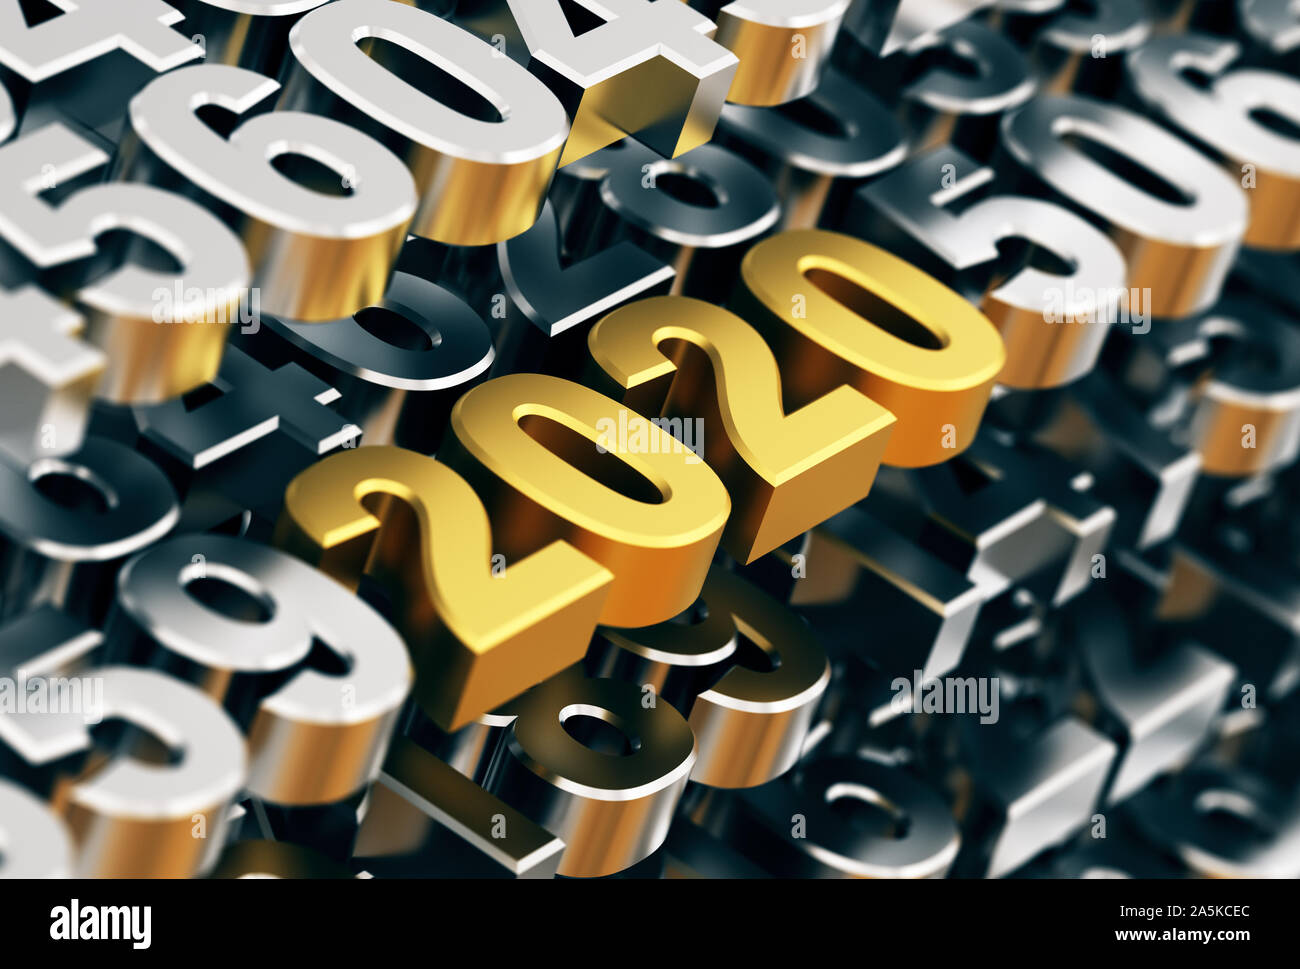 Digital Matrix From Metal Numbers With Golden Numbers 2020. 3D Illustration. Stock Photo